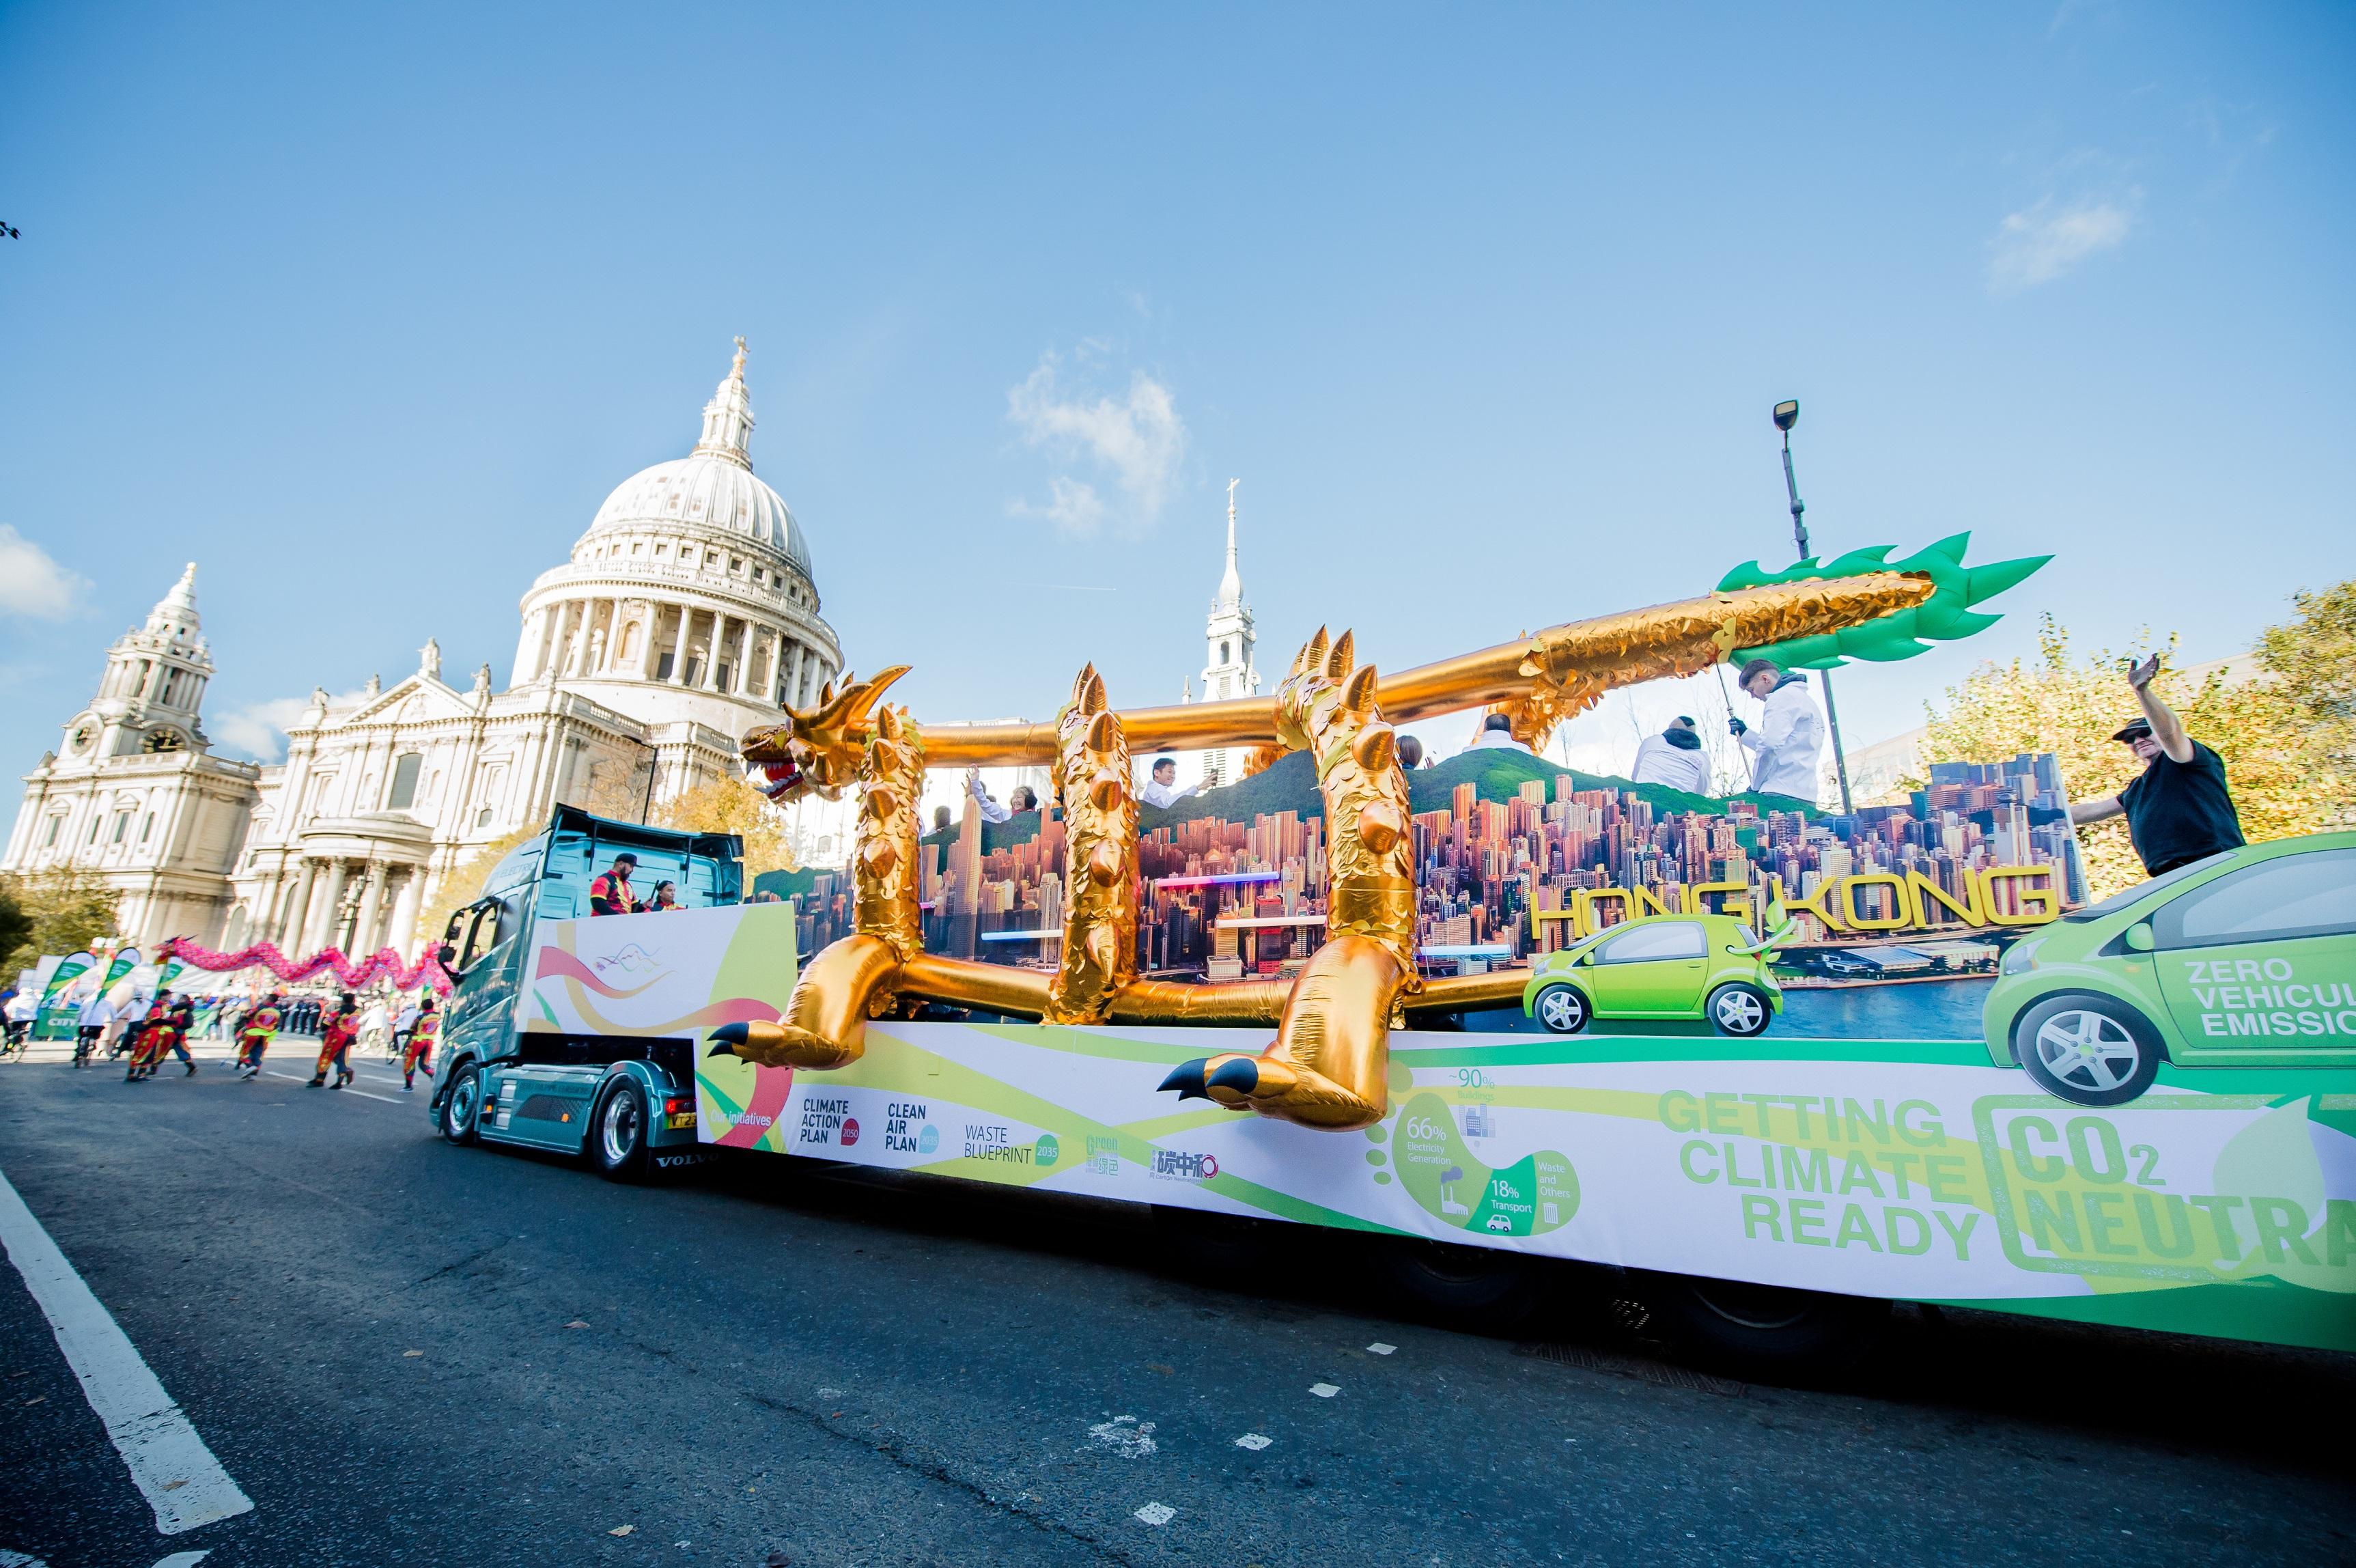 The Hong Kong Economic and Trade Office, London took part in the City of London Lord Mayor's Show on November 11 (London time) with a float highlighting Hong Kong's plan to achieve carbon neutrality before 2050. Photo shows the float passing the St Paul's Cathedral.